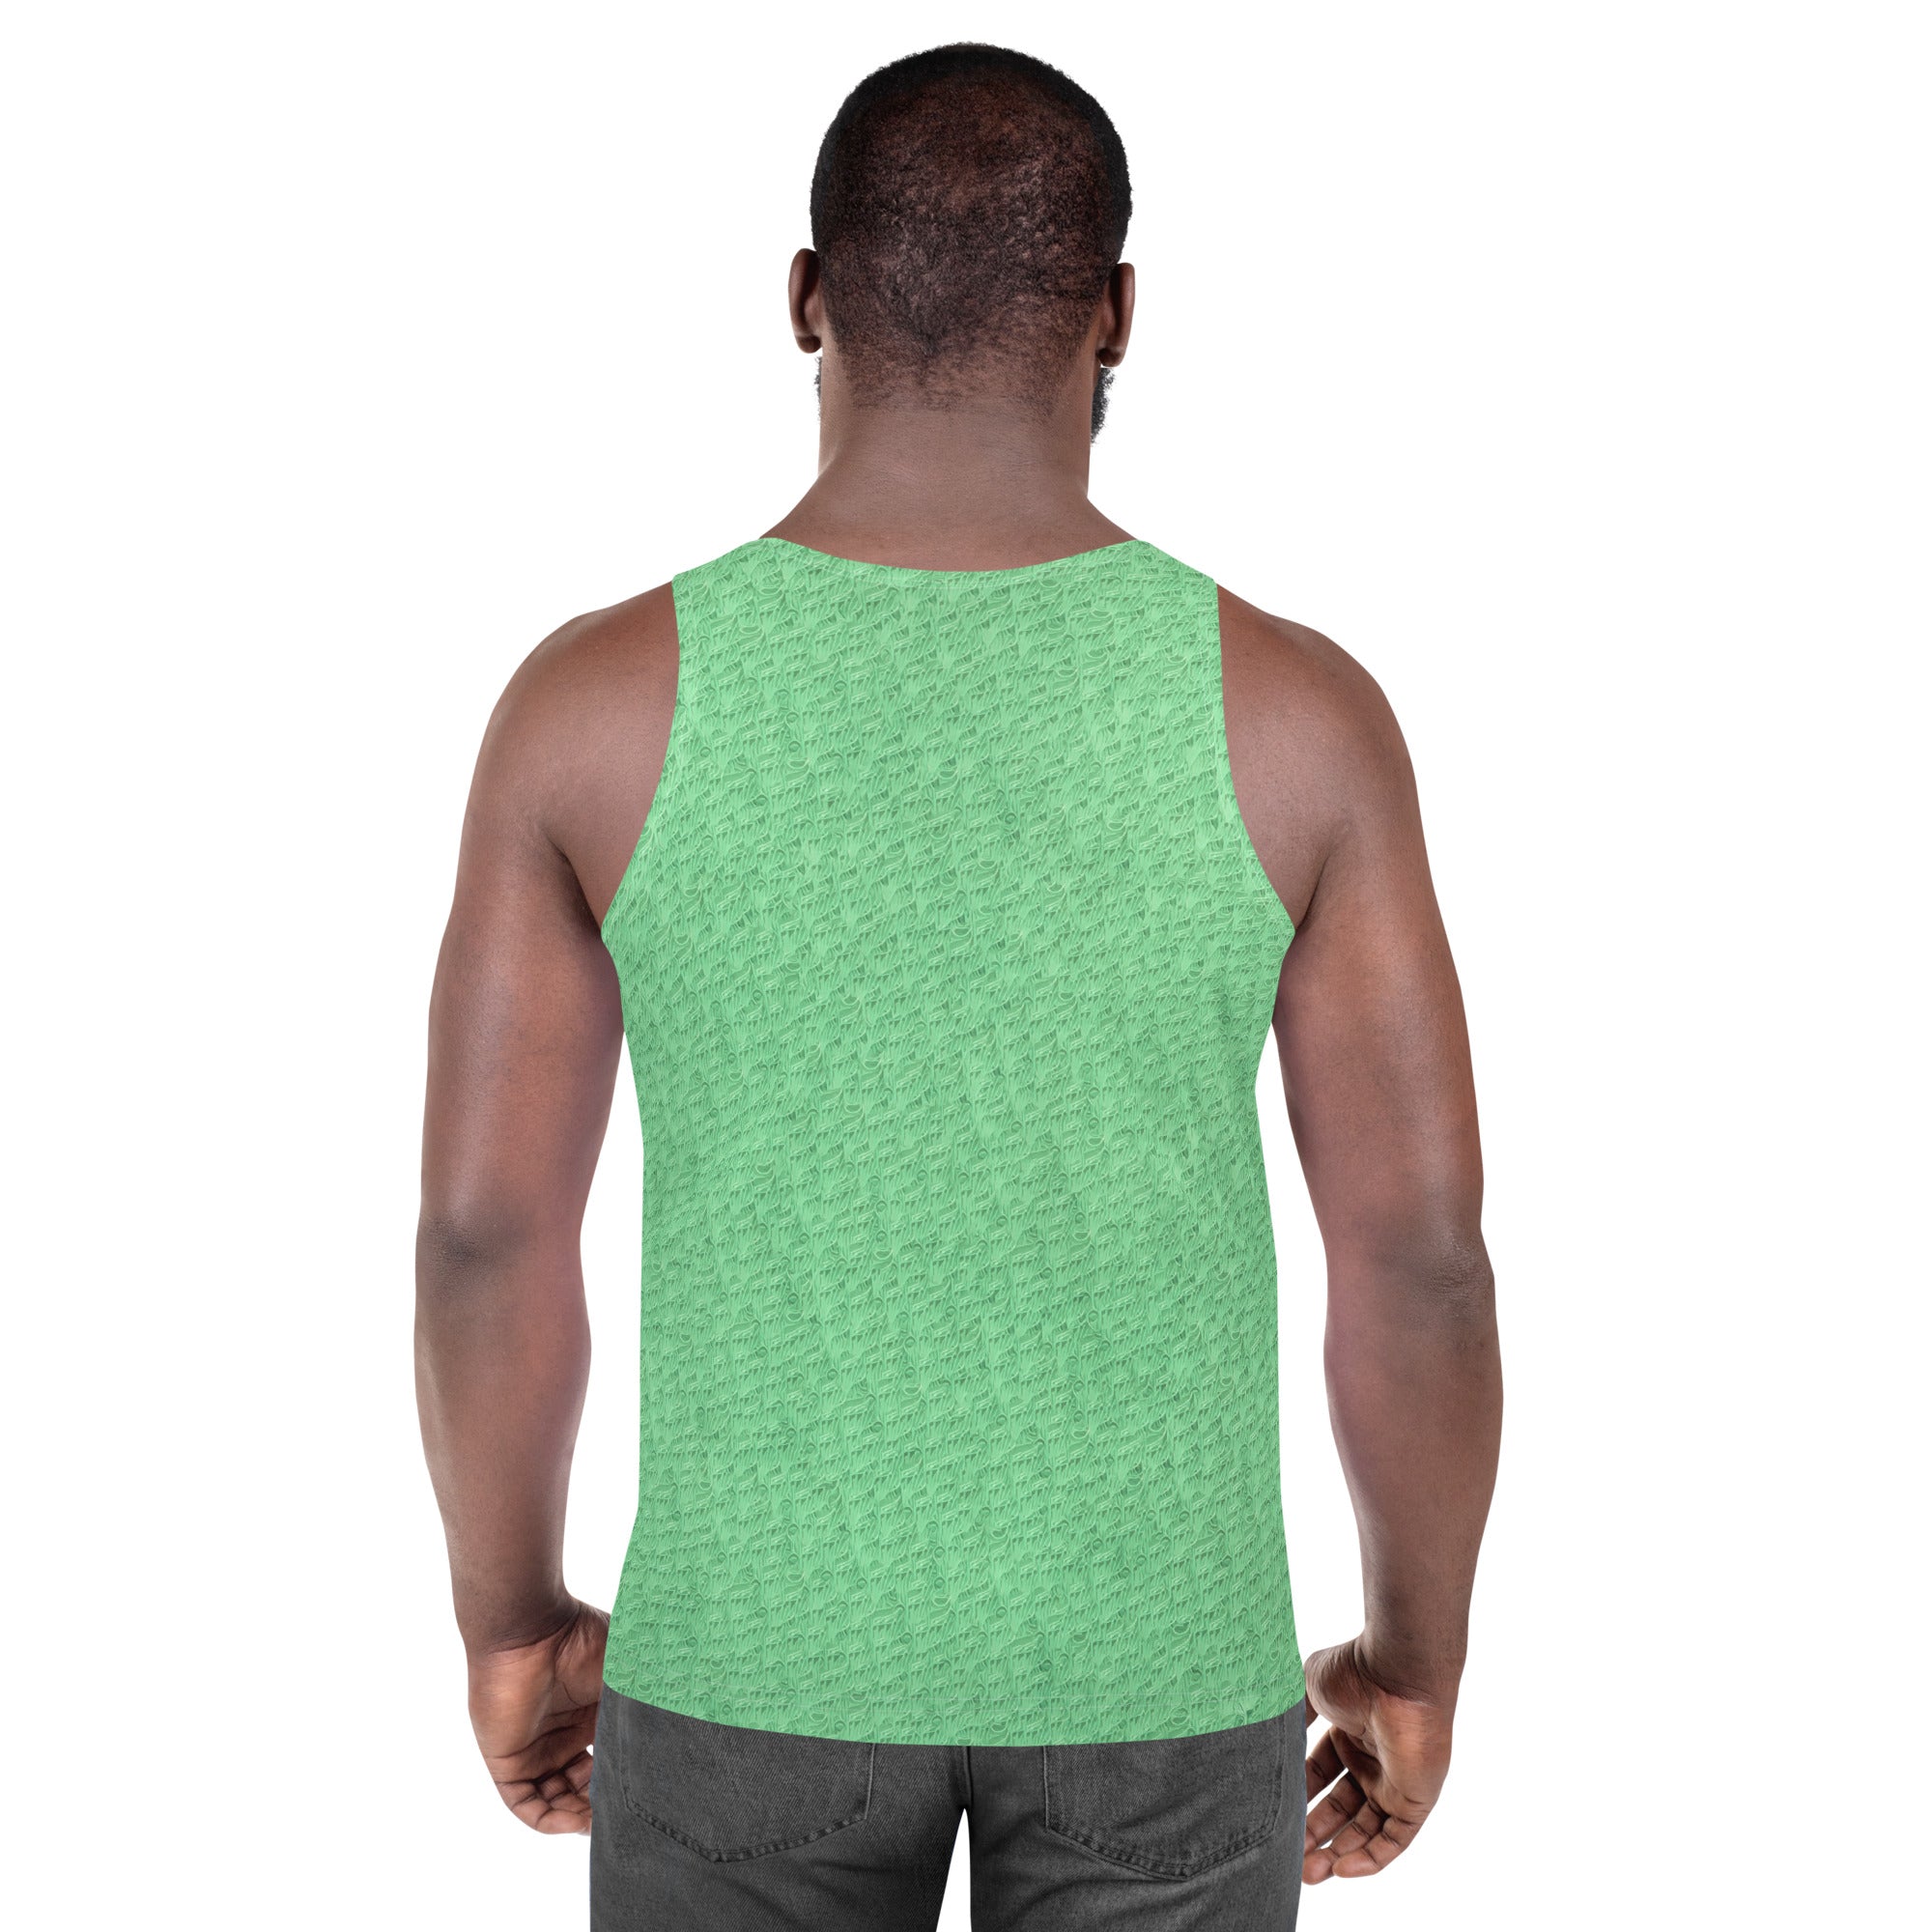 Man wearing Classical Symphony design tank top, showcasing style and comfort.